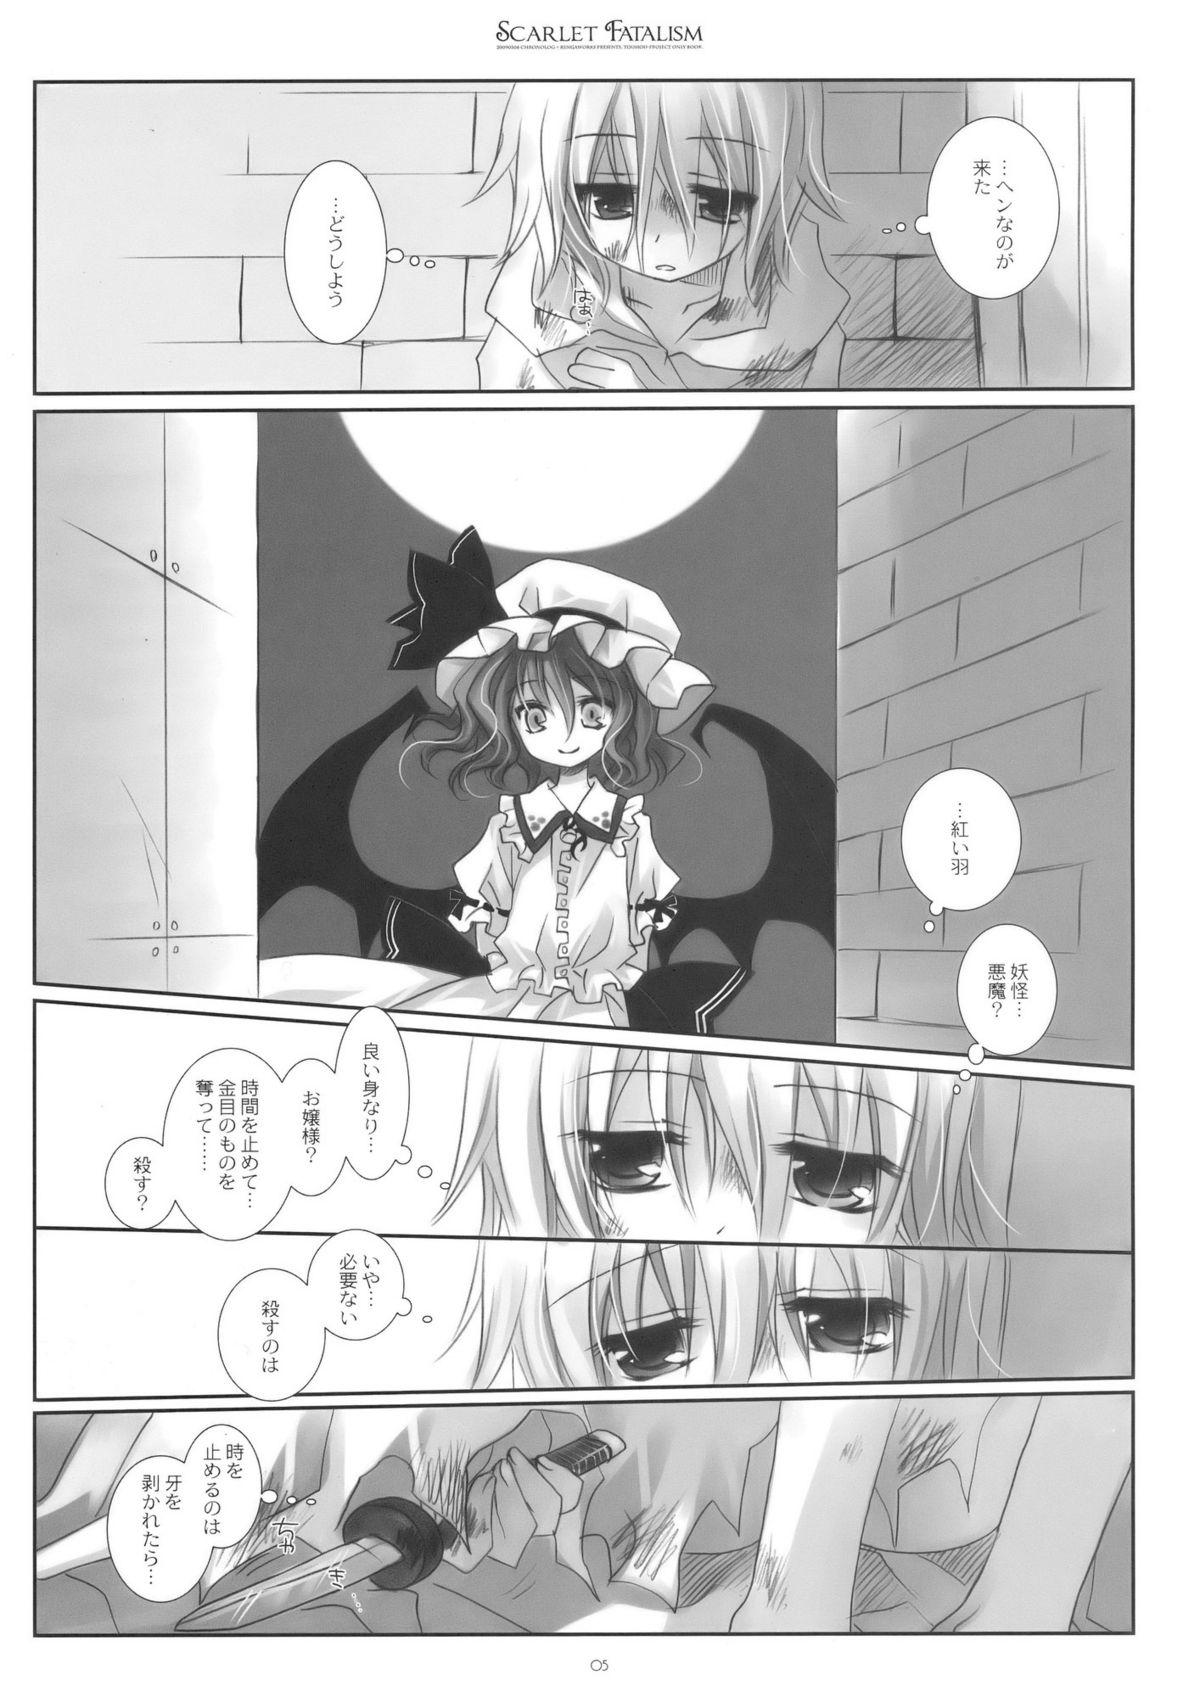 Blows Scarlet Fatalism - Touhou project Cumswallow - Page 5